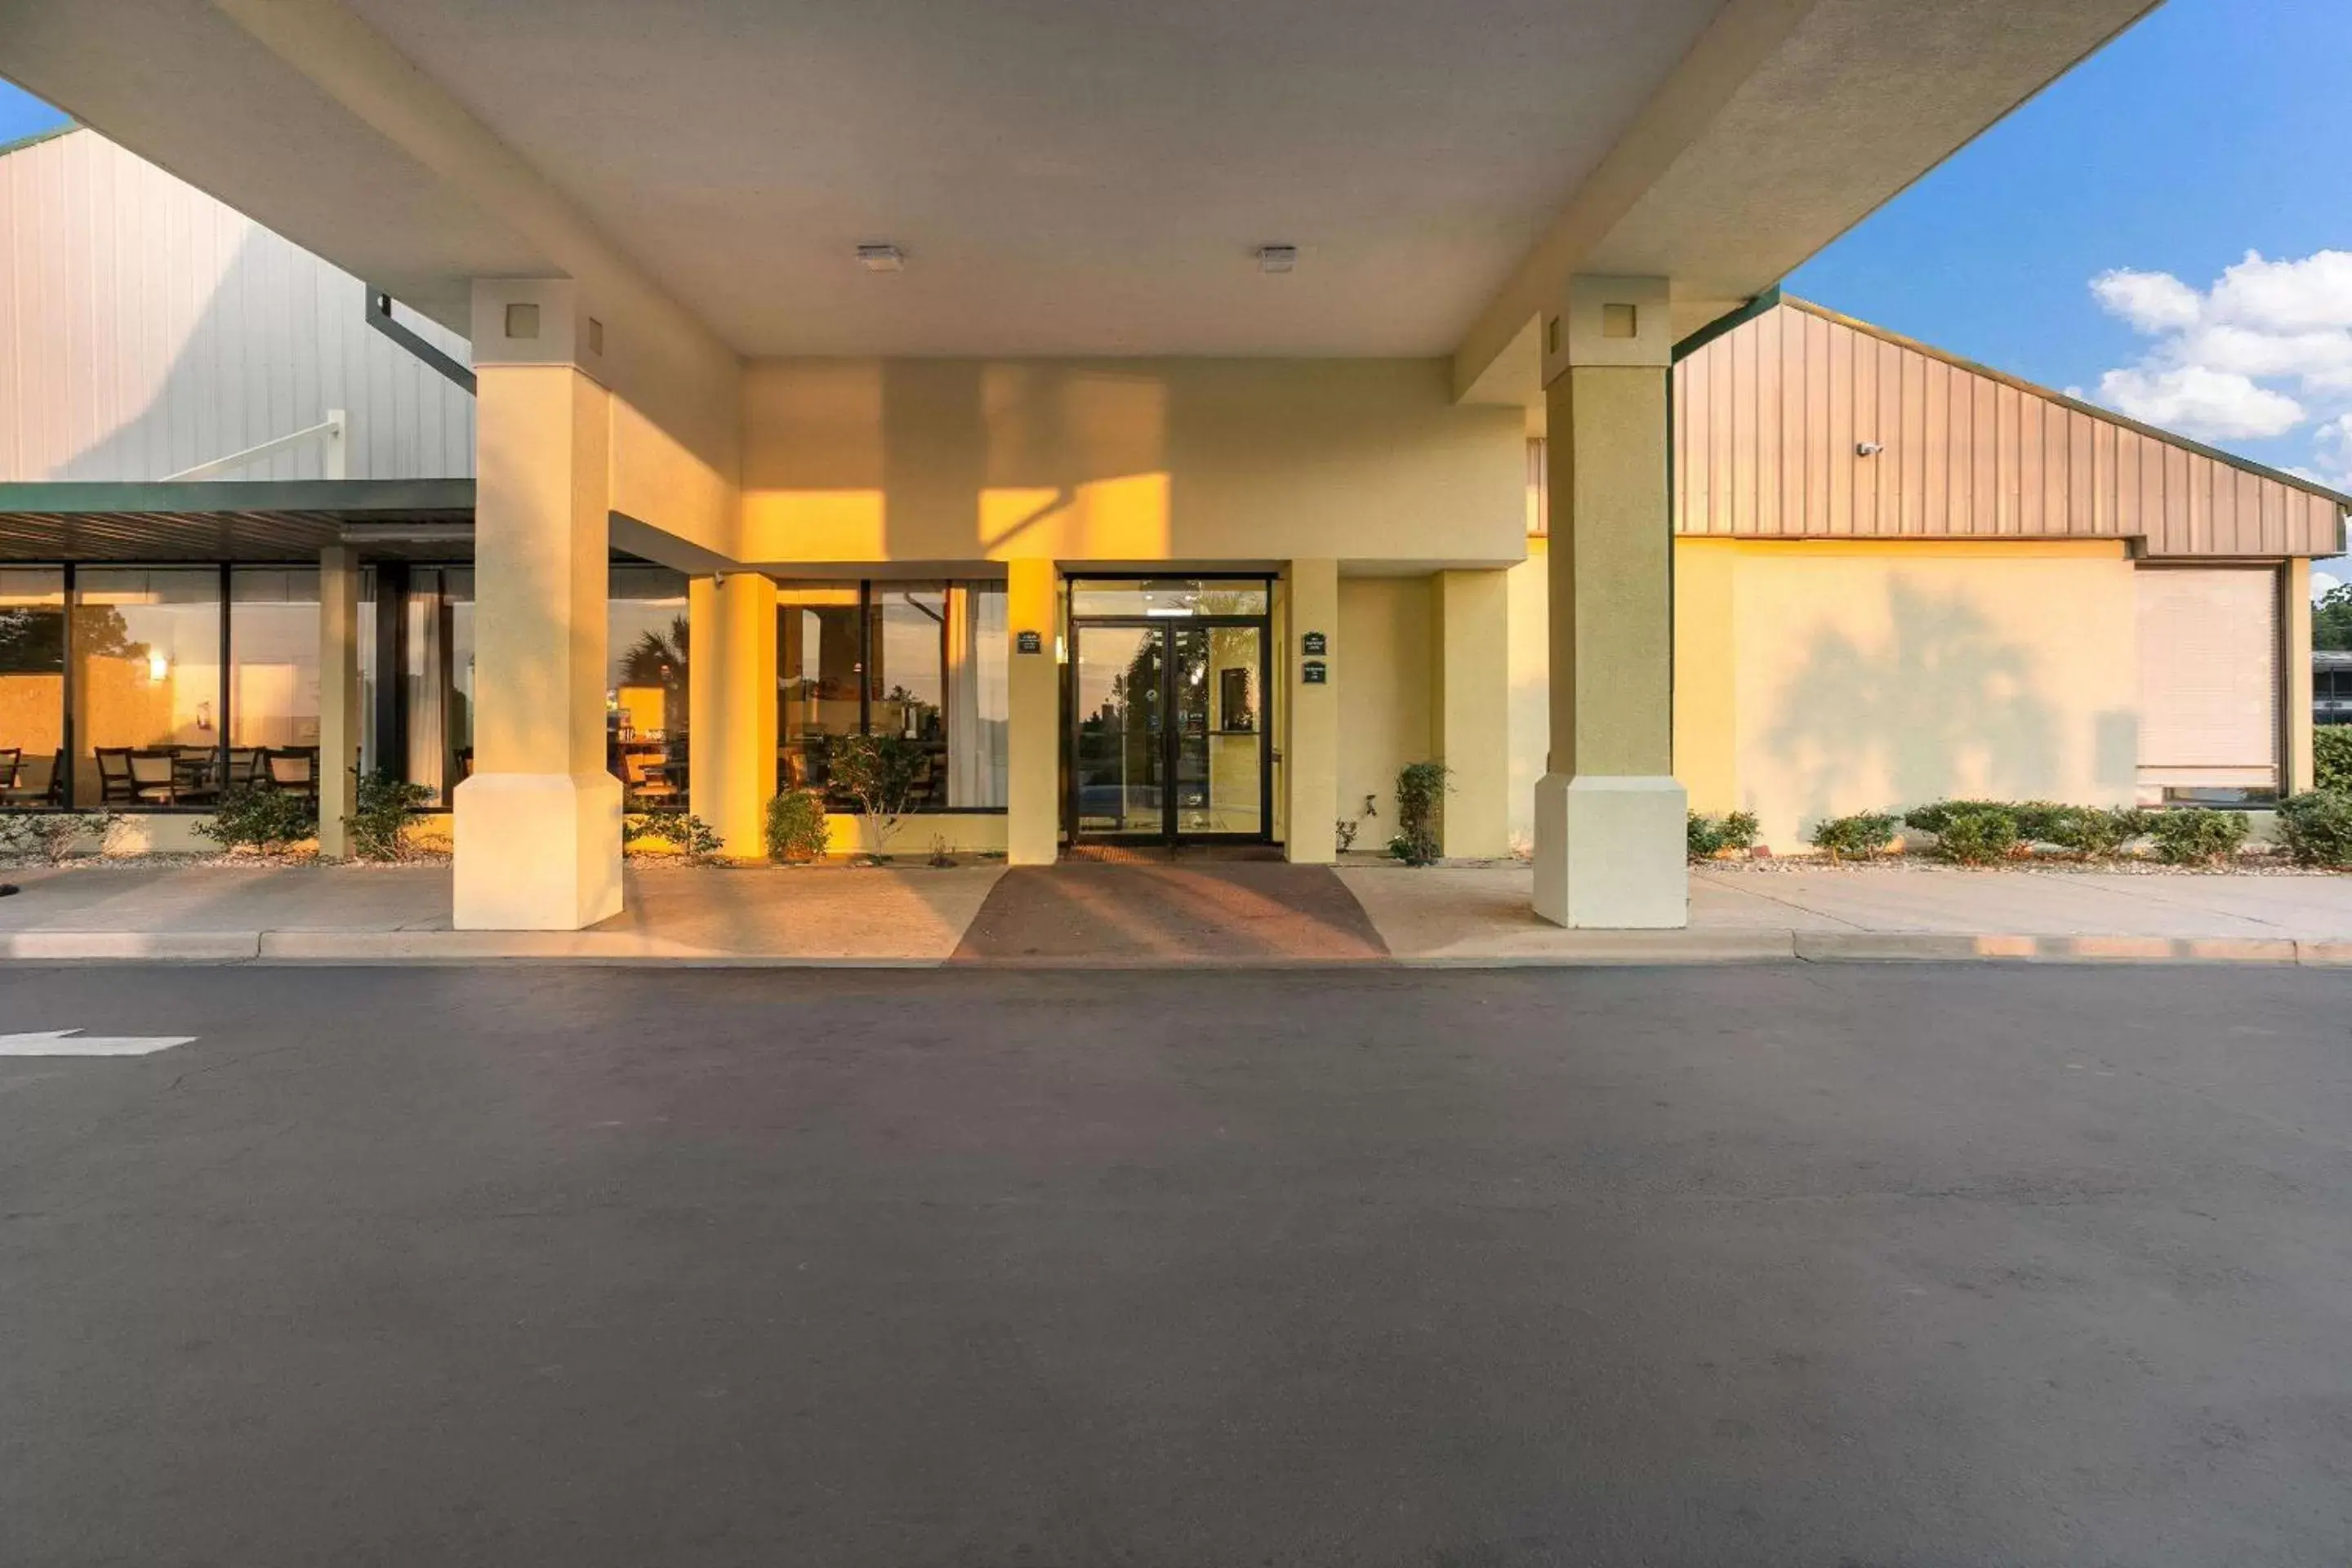 Property building in Quality Inn & Suites Eufaula